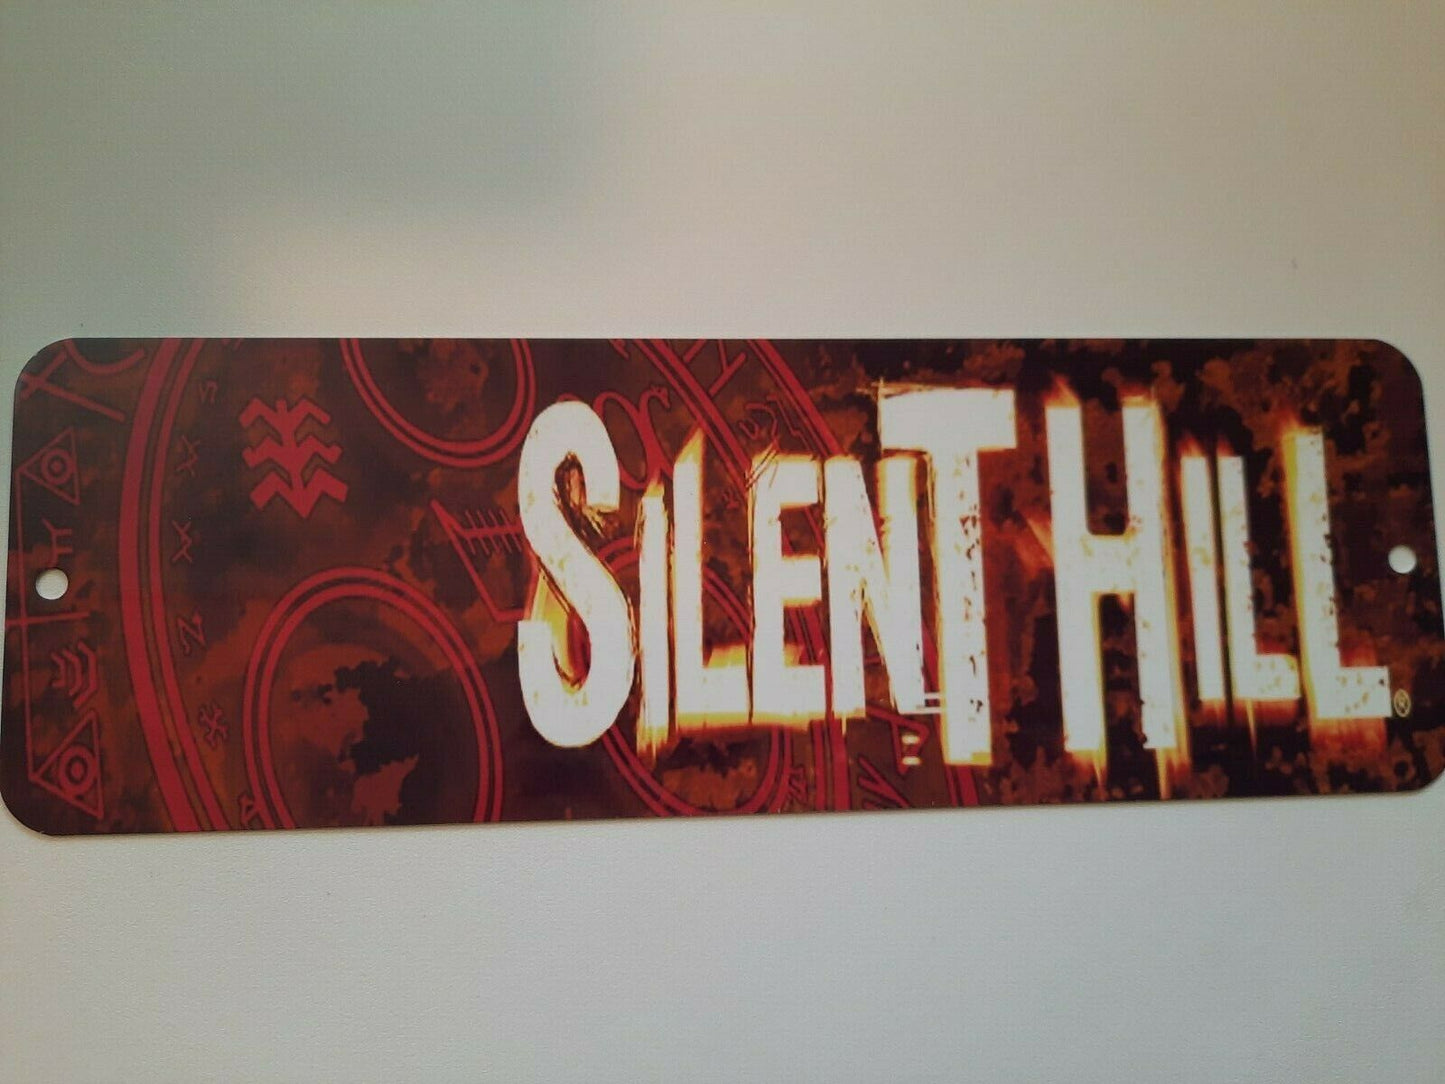 Silent Hill 4x12 Metal Wall Sign Video Game Arcade Movie